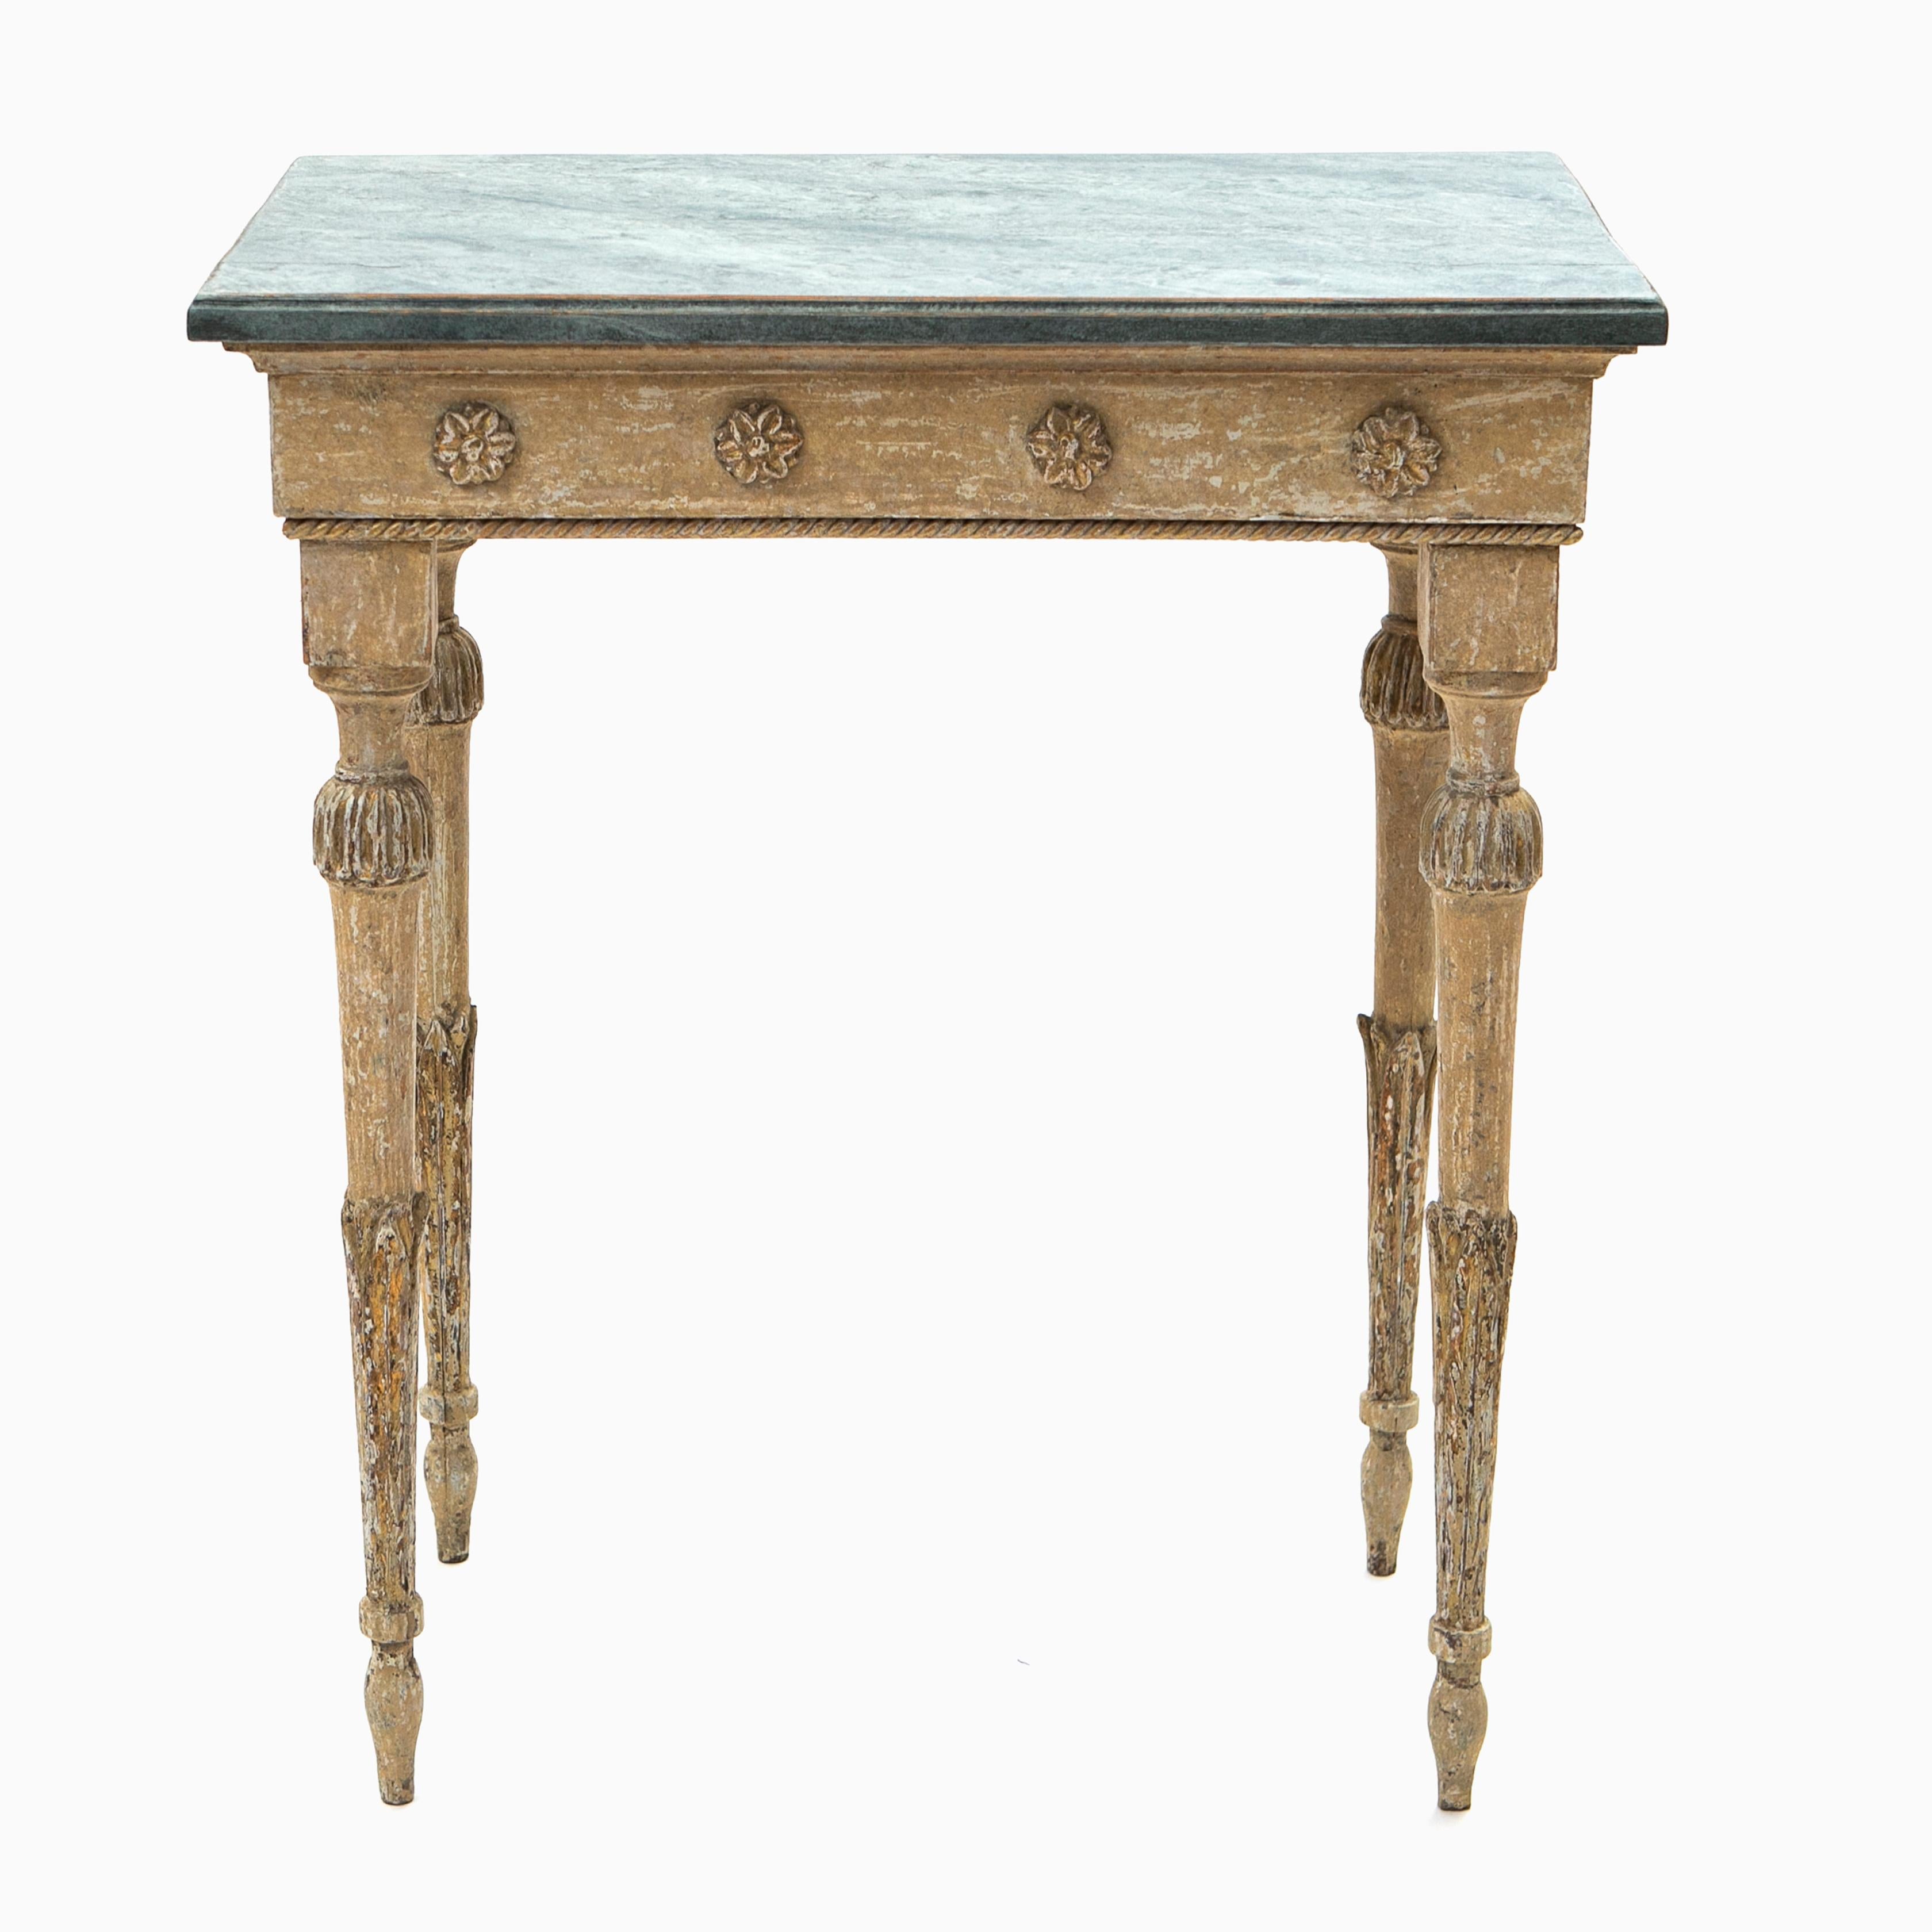 Antique Swedish console table from the gustavian period.
The table has been dry scraped by hand down to traces of the original ocher yellow paint which has a rustic surface and charming patina.
Wooden blue-green faux marbled tabletop.
Front apron